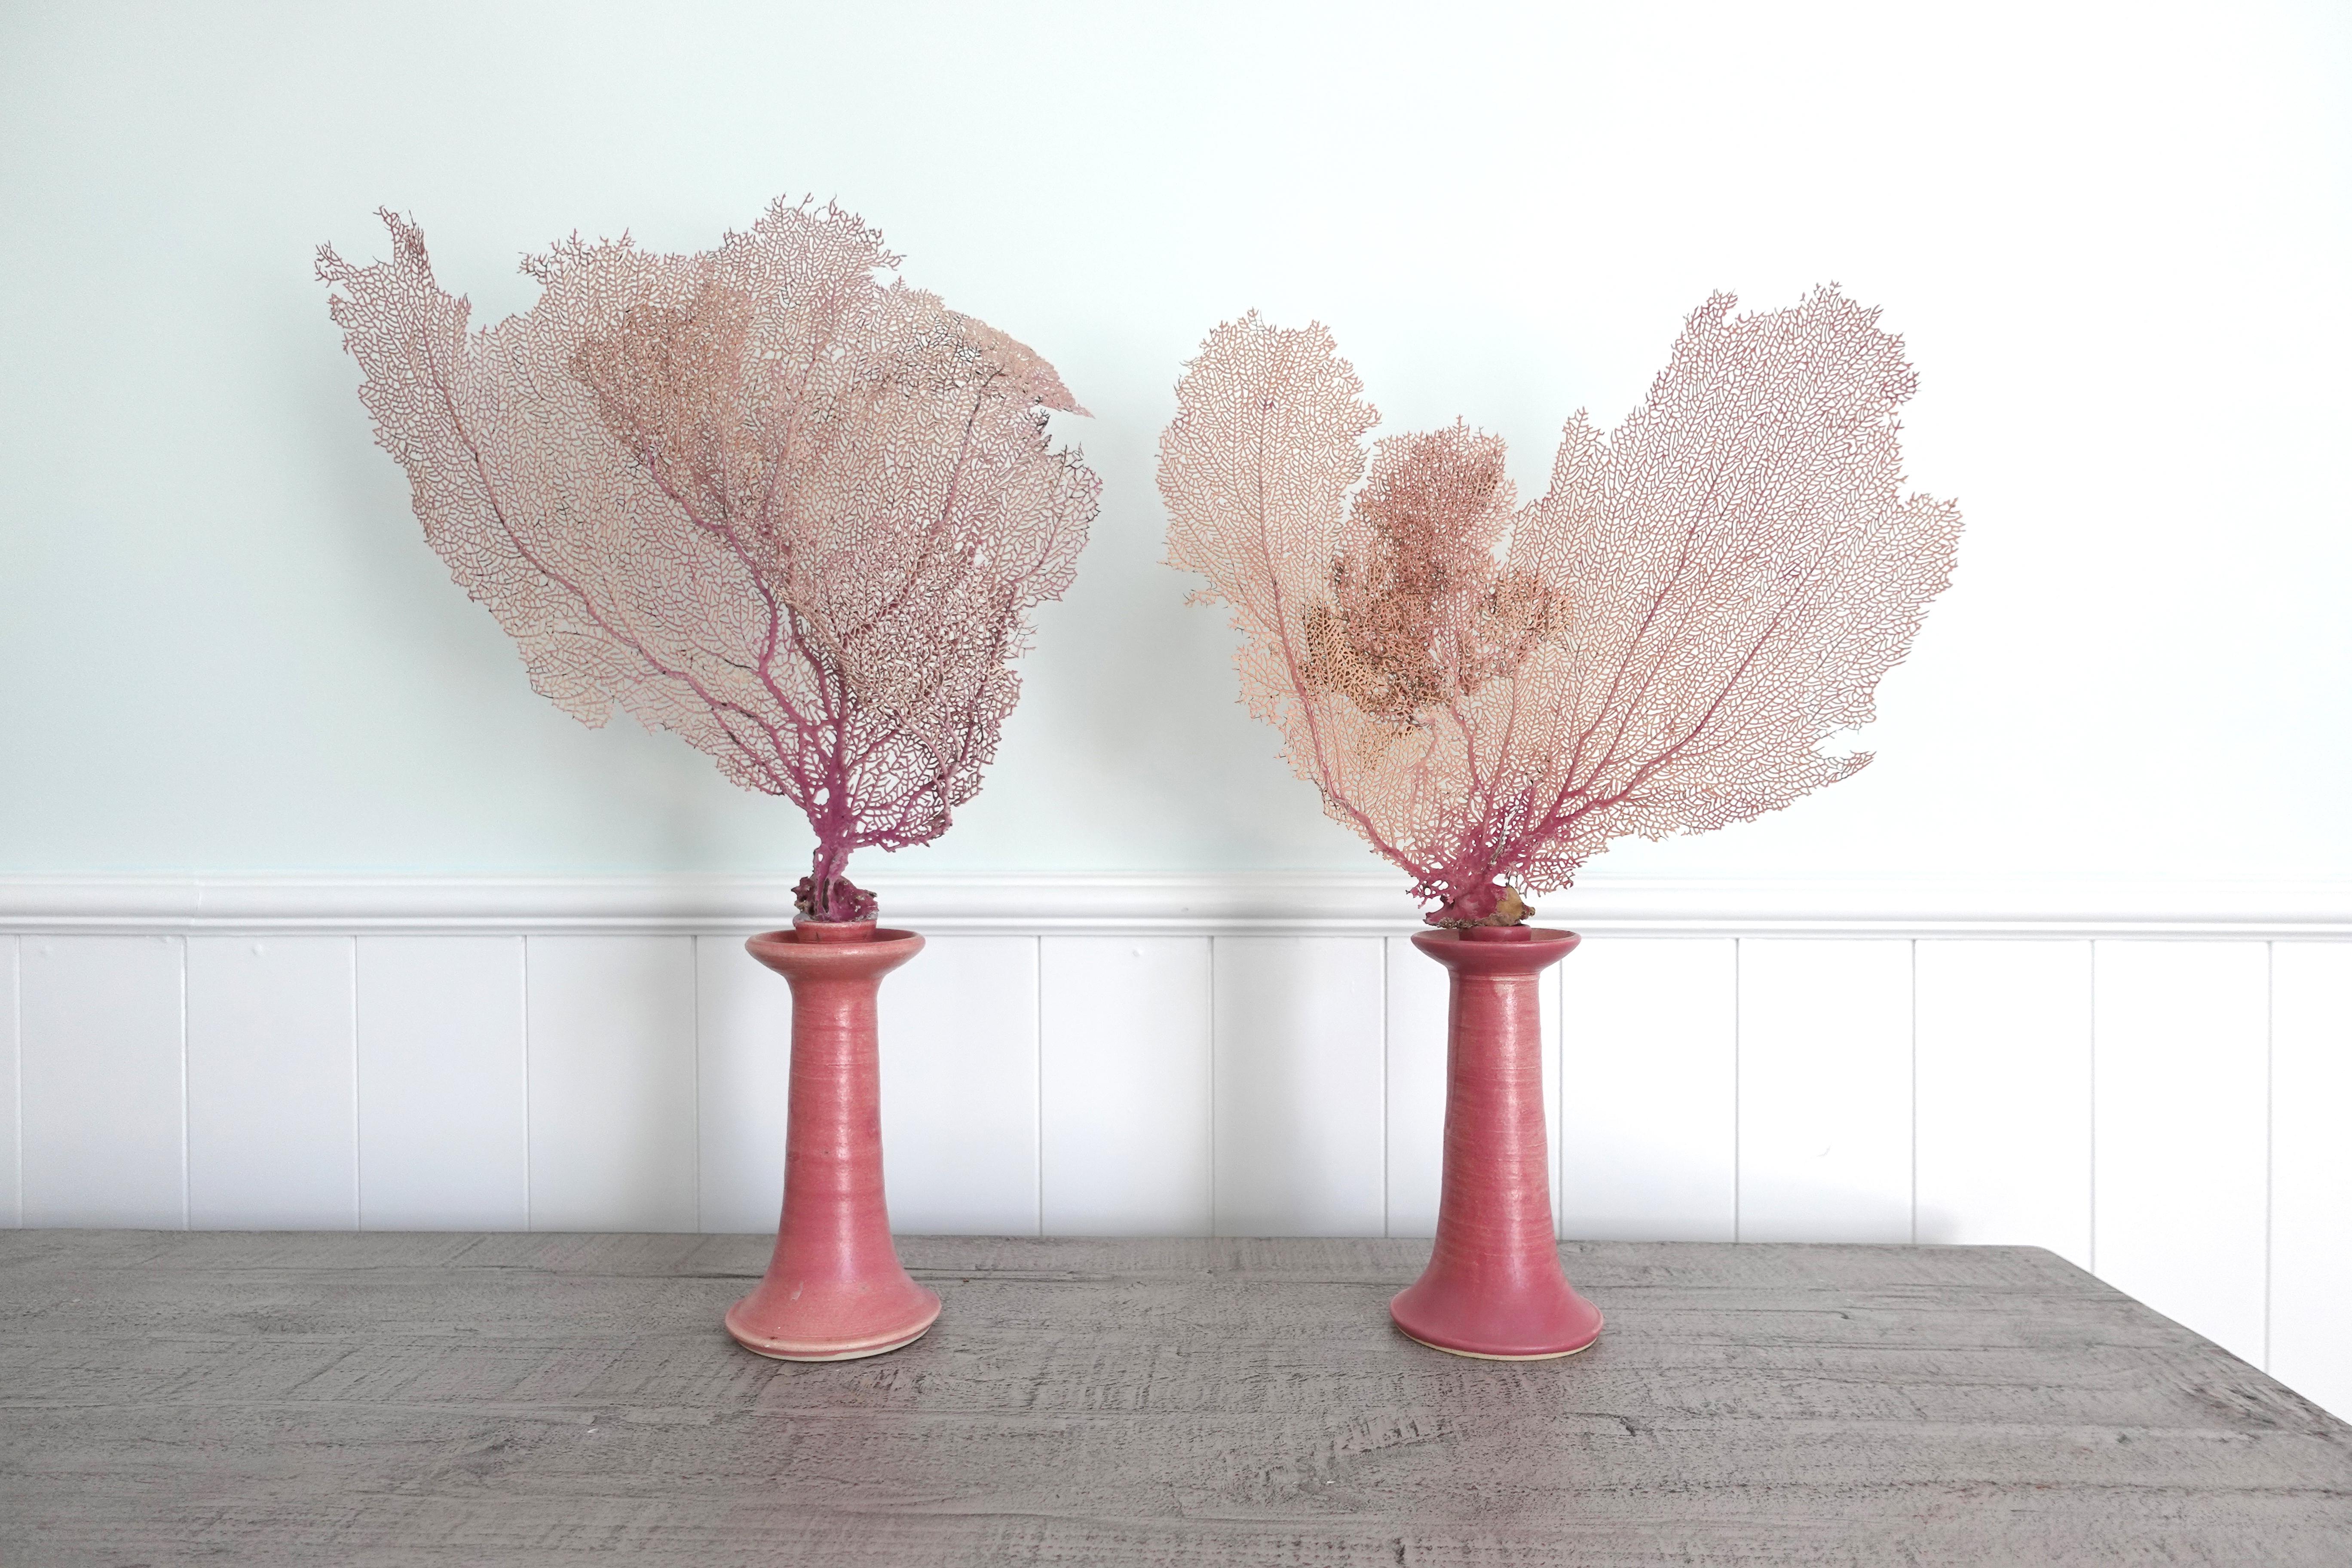 A pair of Pink Toned Natural Sea Fans mounted to accompanying hand-made Candlestick bases by Chriscoe

Graham Chriscoe (candlestick bases)
North Carolina, USA; 1990

Approximate size:  24 (w) x 16 (h) x 3.5 (d) in. ea.

A pair of naturally harvested